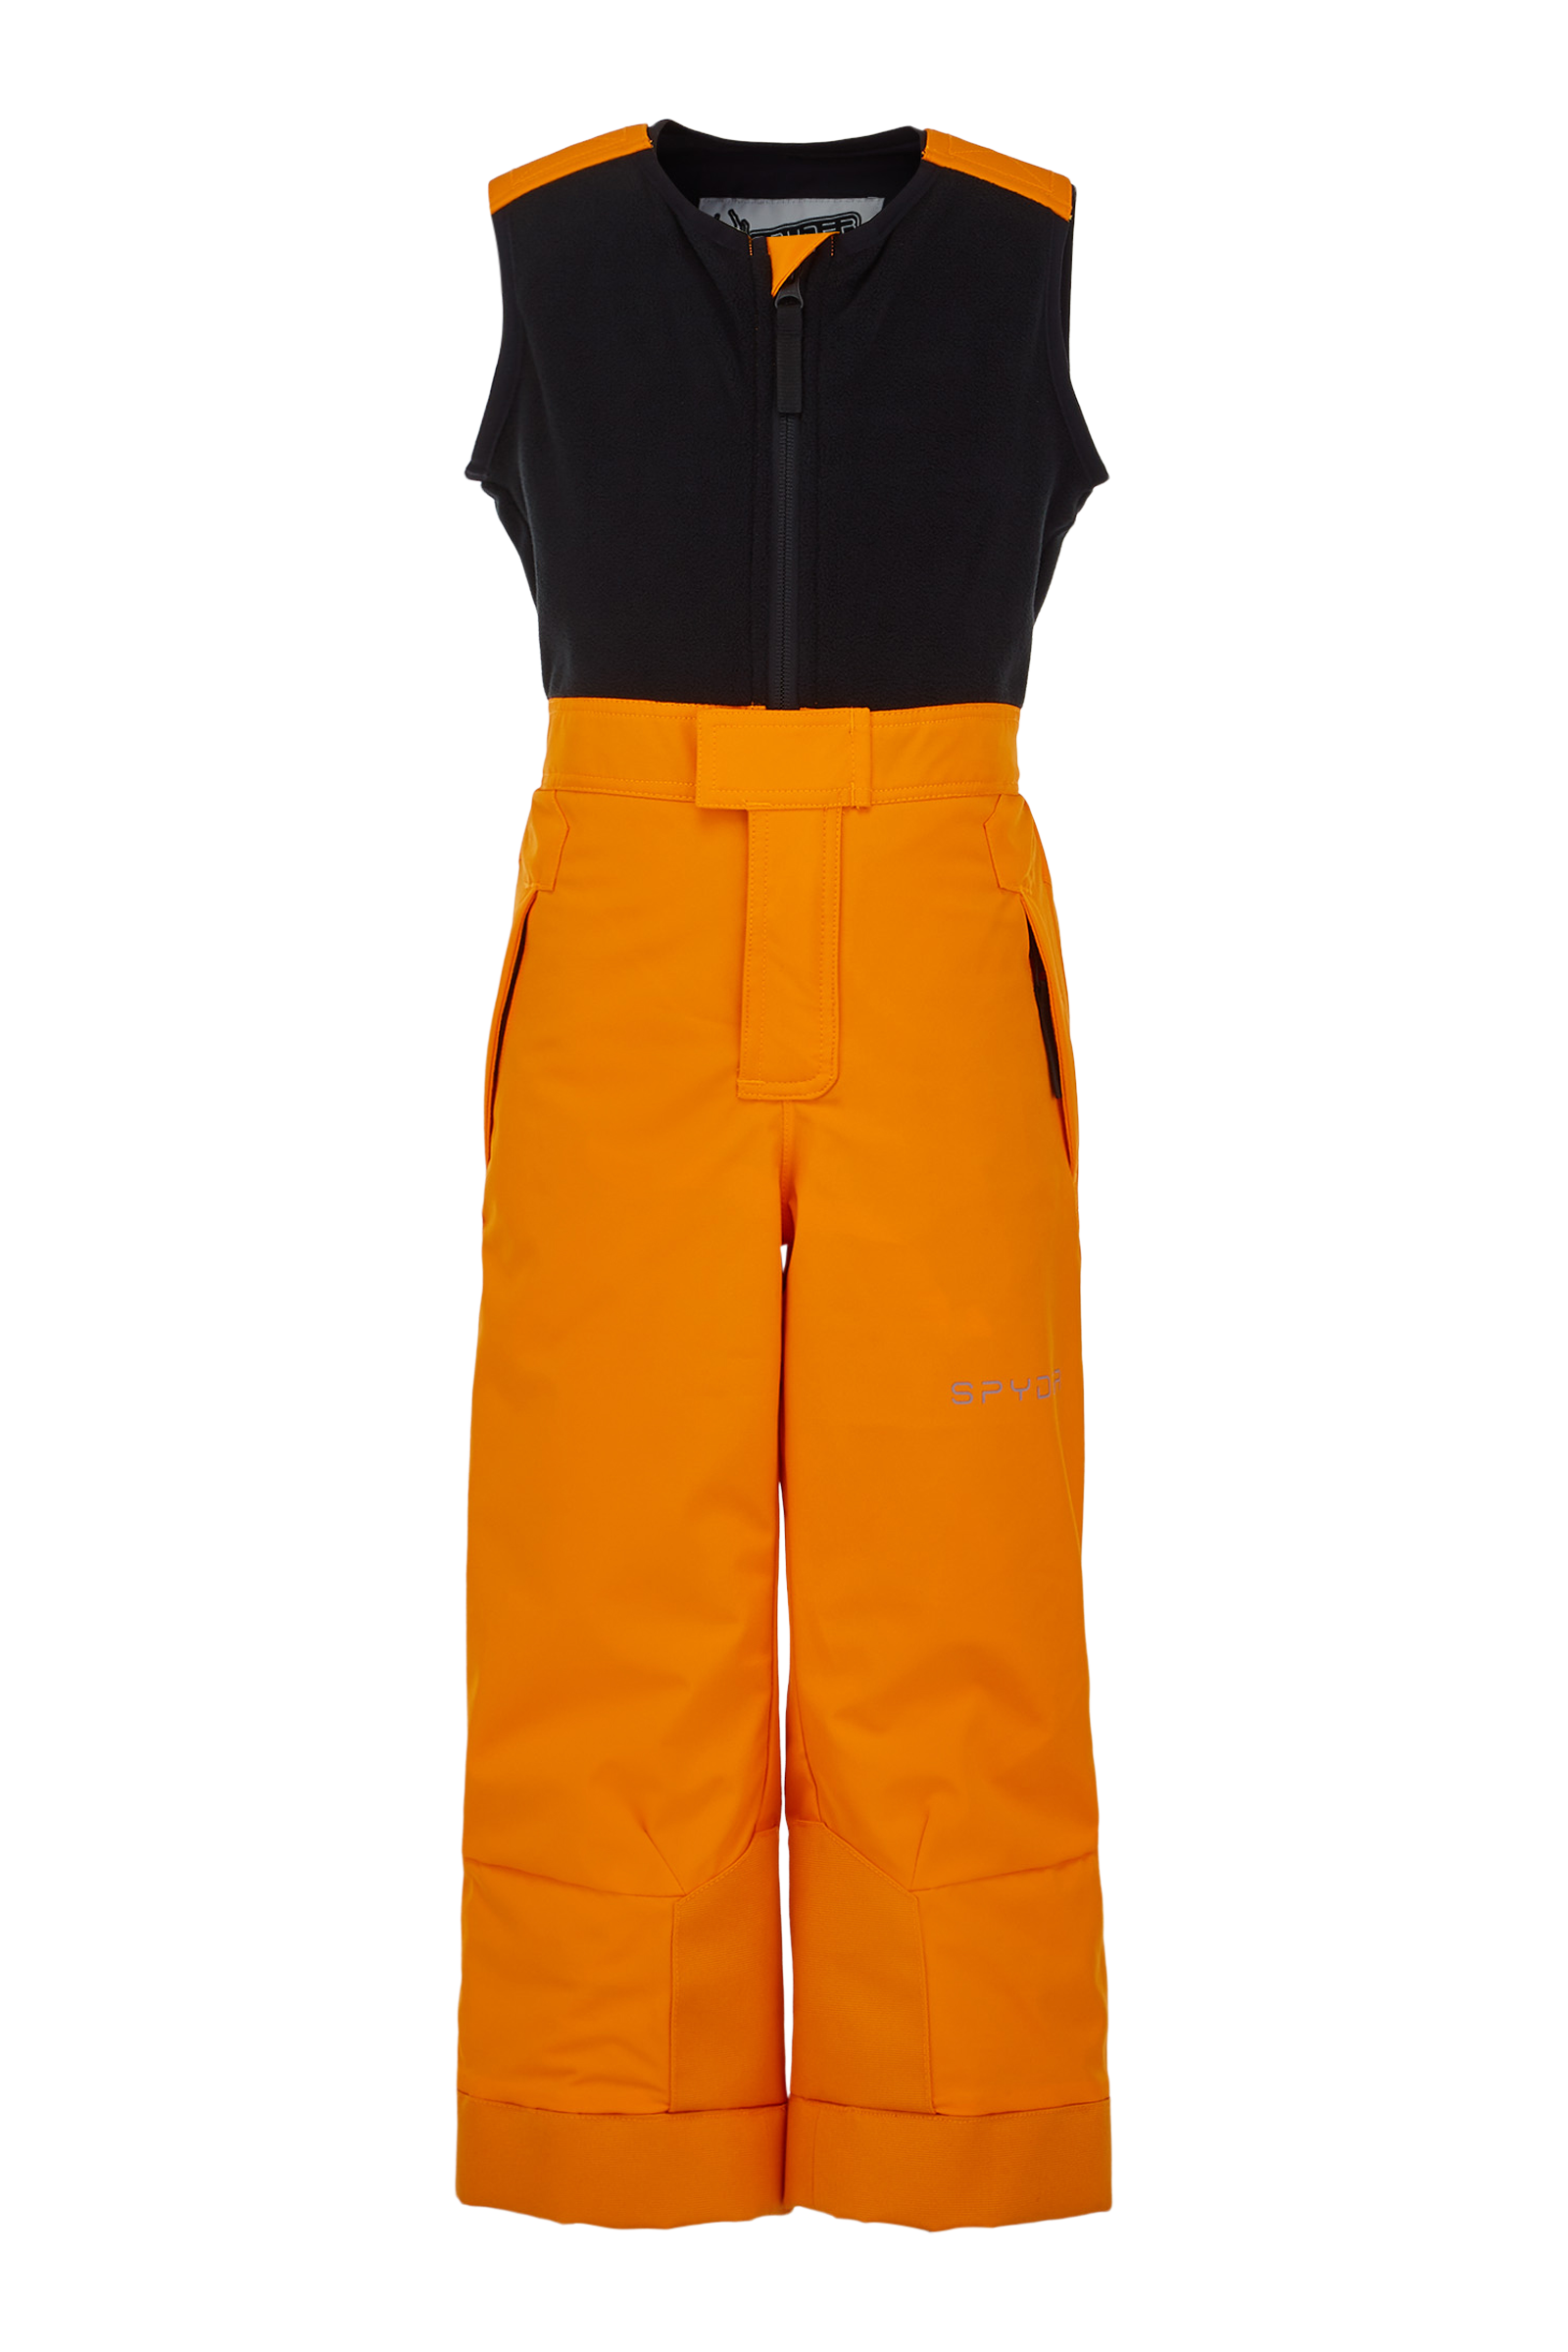 Spyder Boys' Expedition Pant - Winter 2021/2022